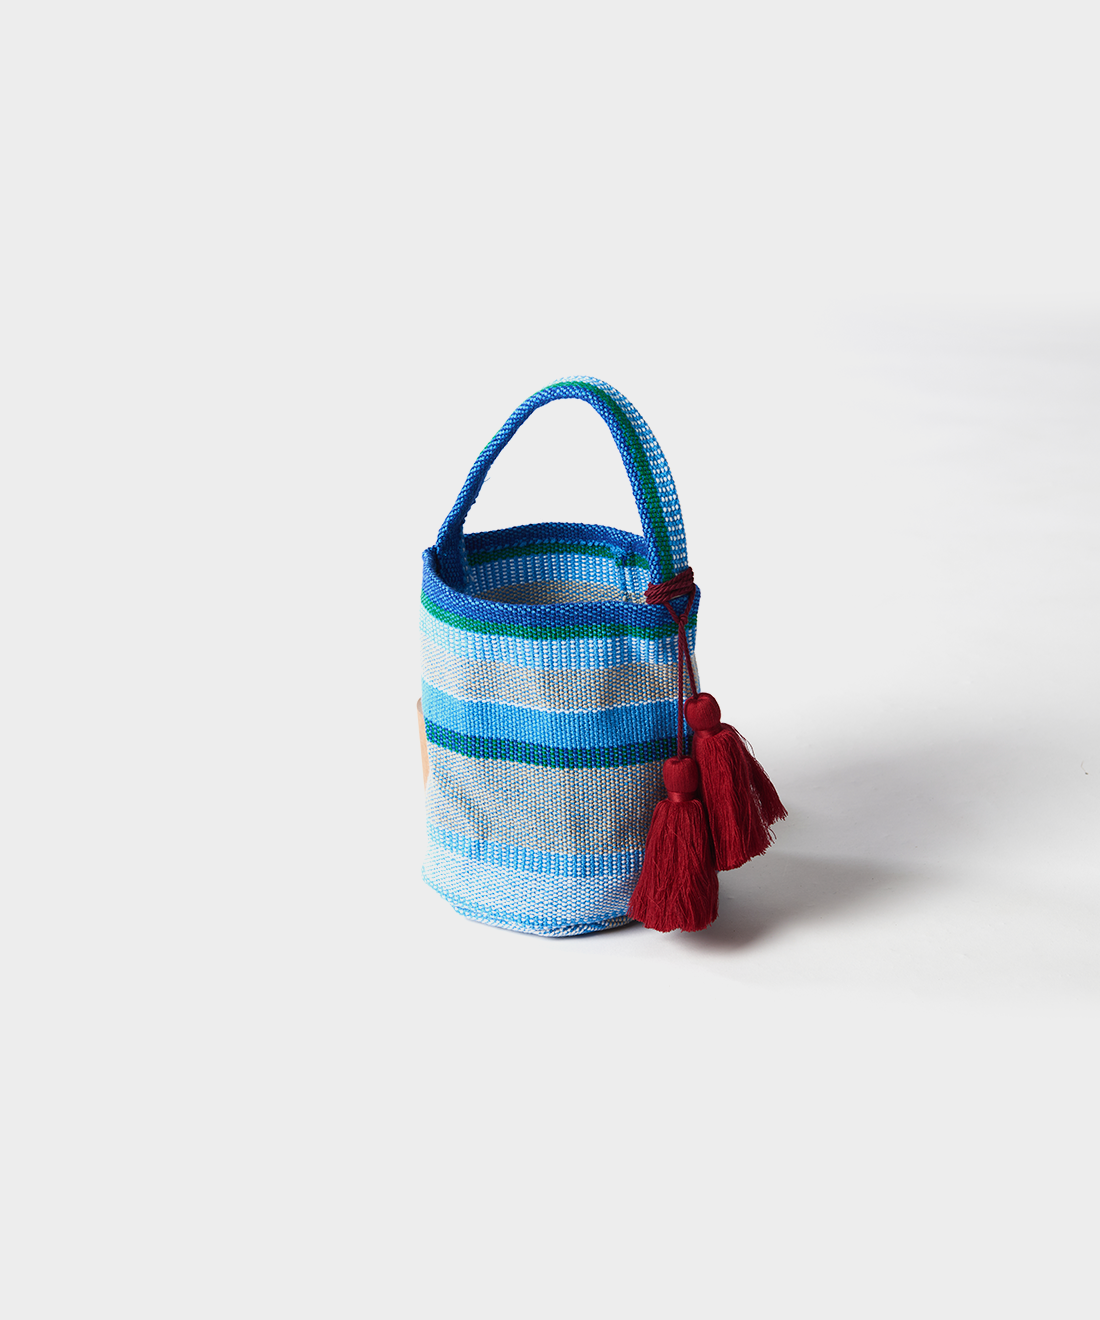 Small Bucket Bag in Blue